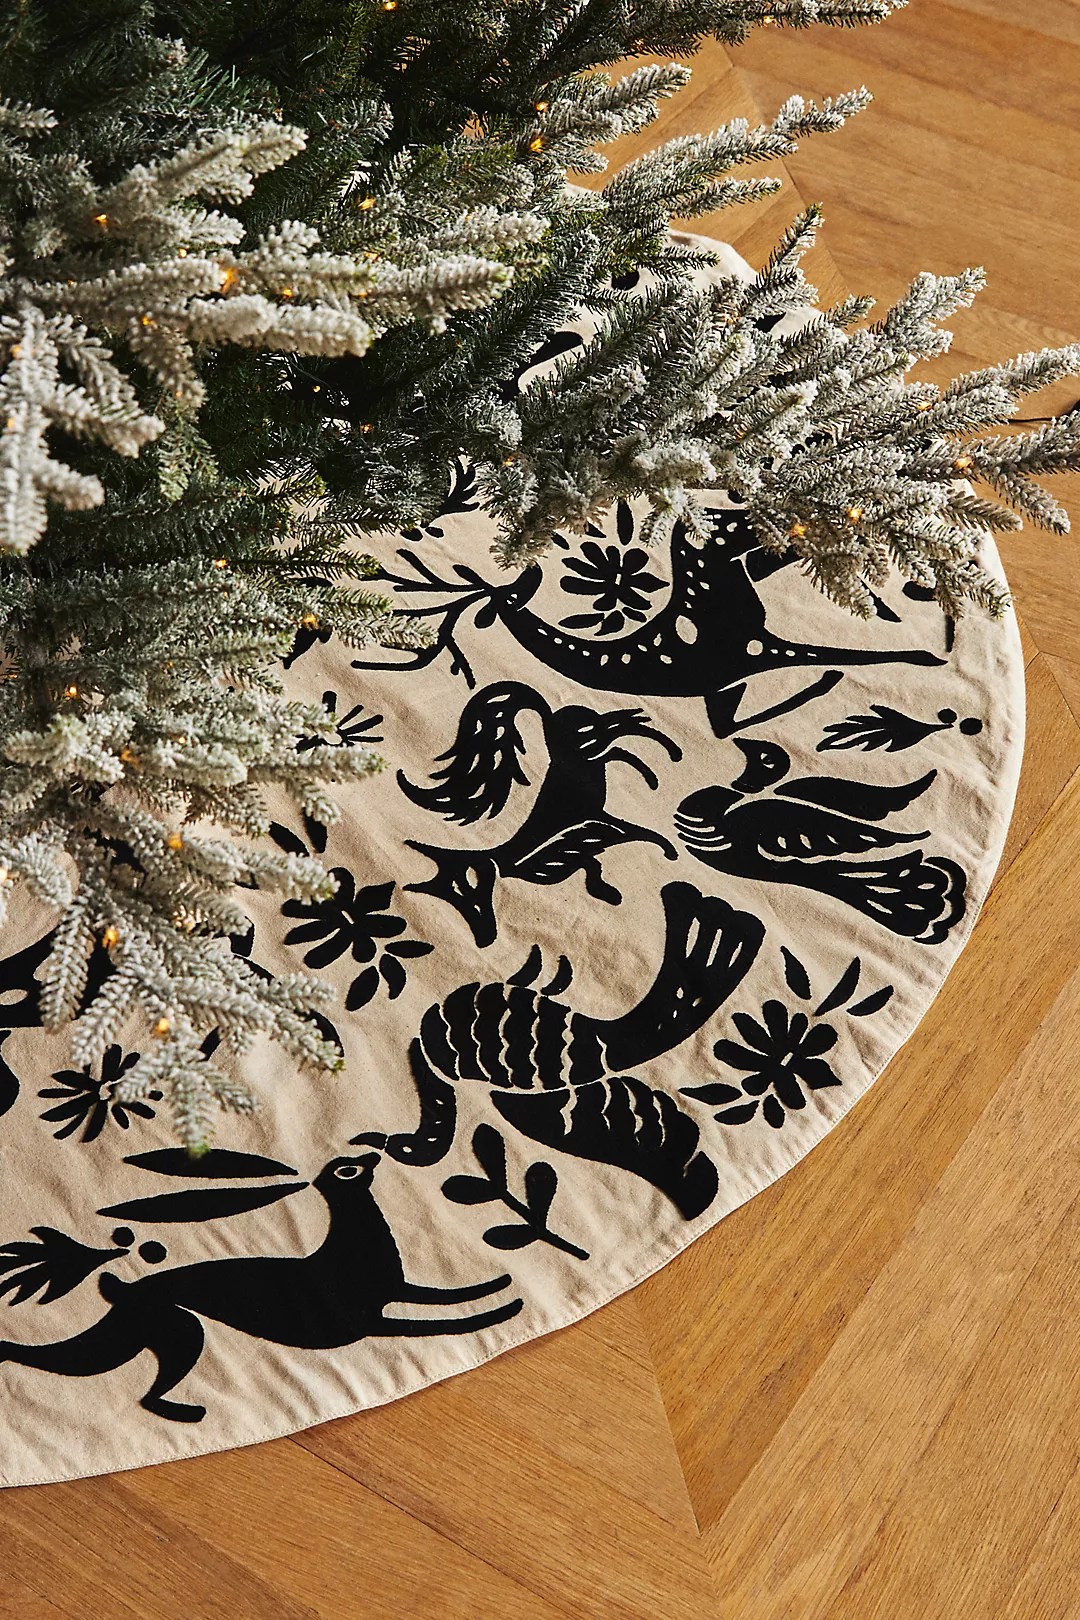 tree embroidery dress from anthropologie's black friday sale